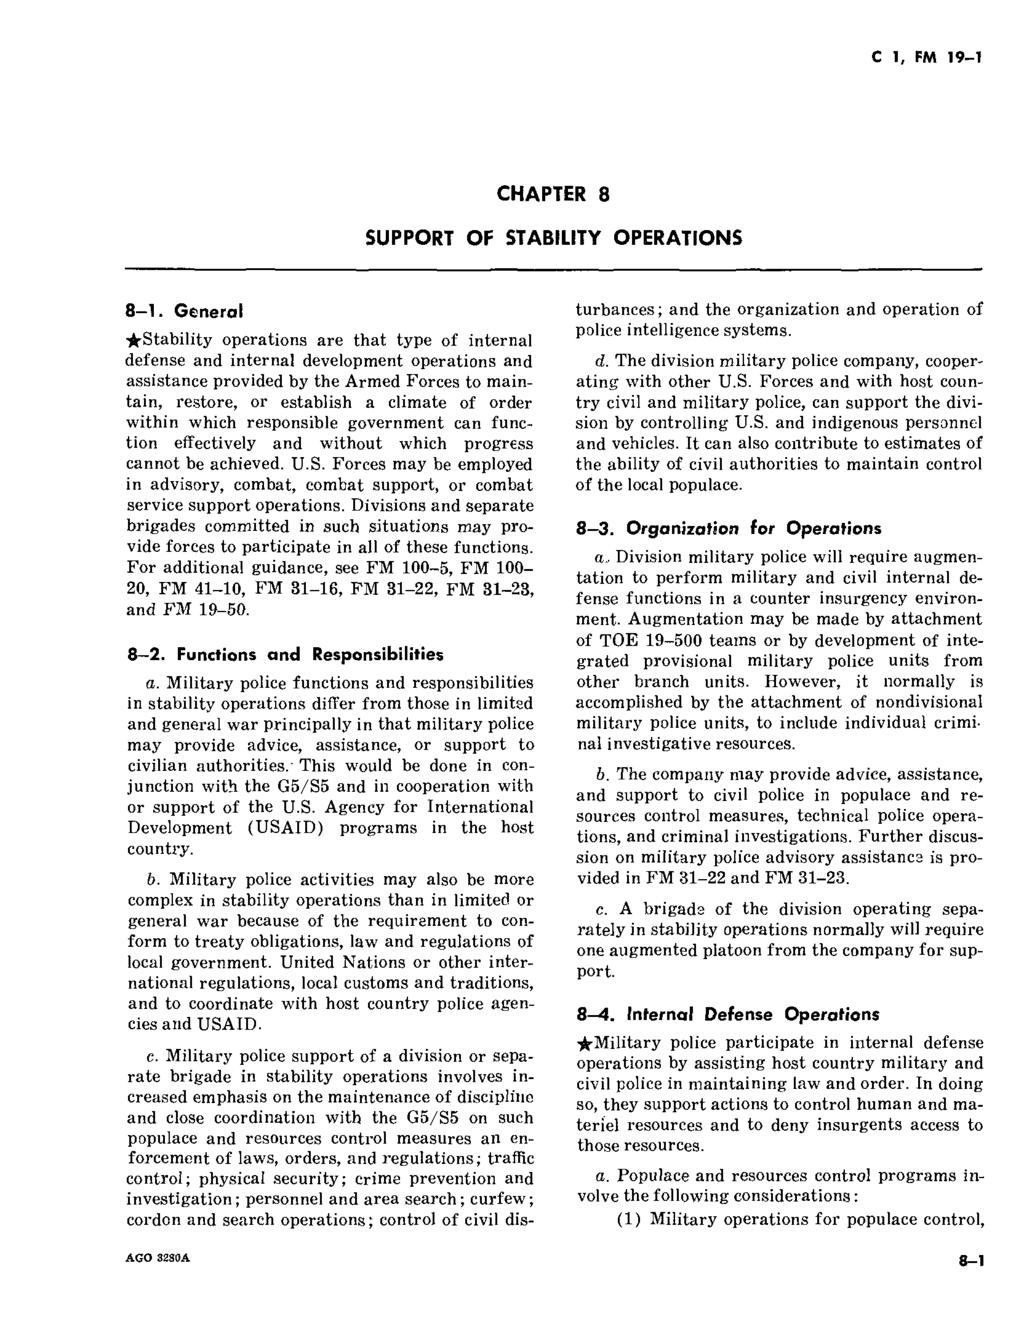 CHAPTER 8 SUPPORT OF STABILITY OPERATIONS 8-1.